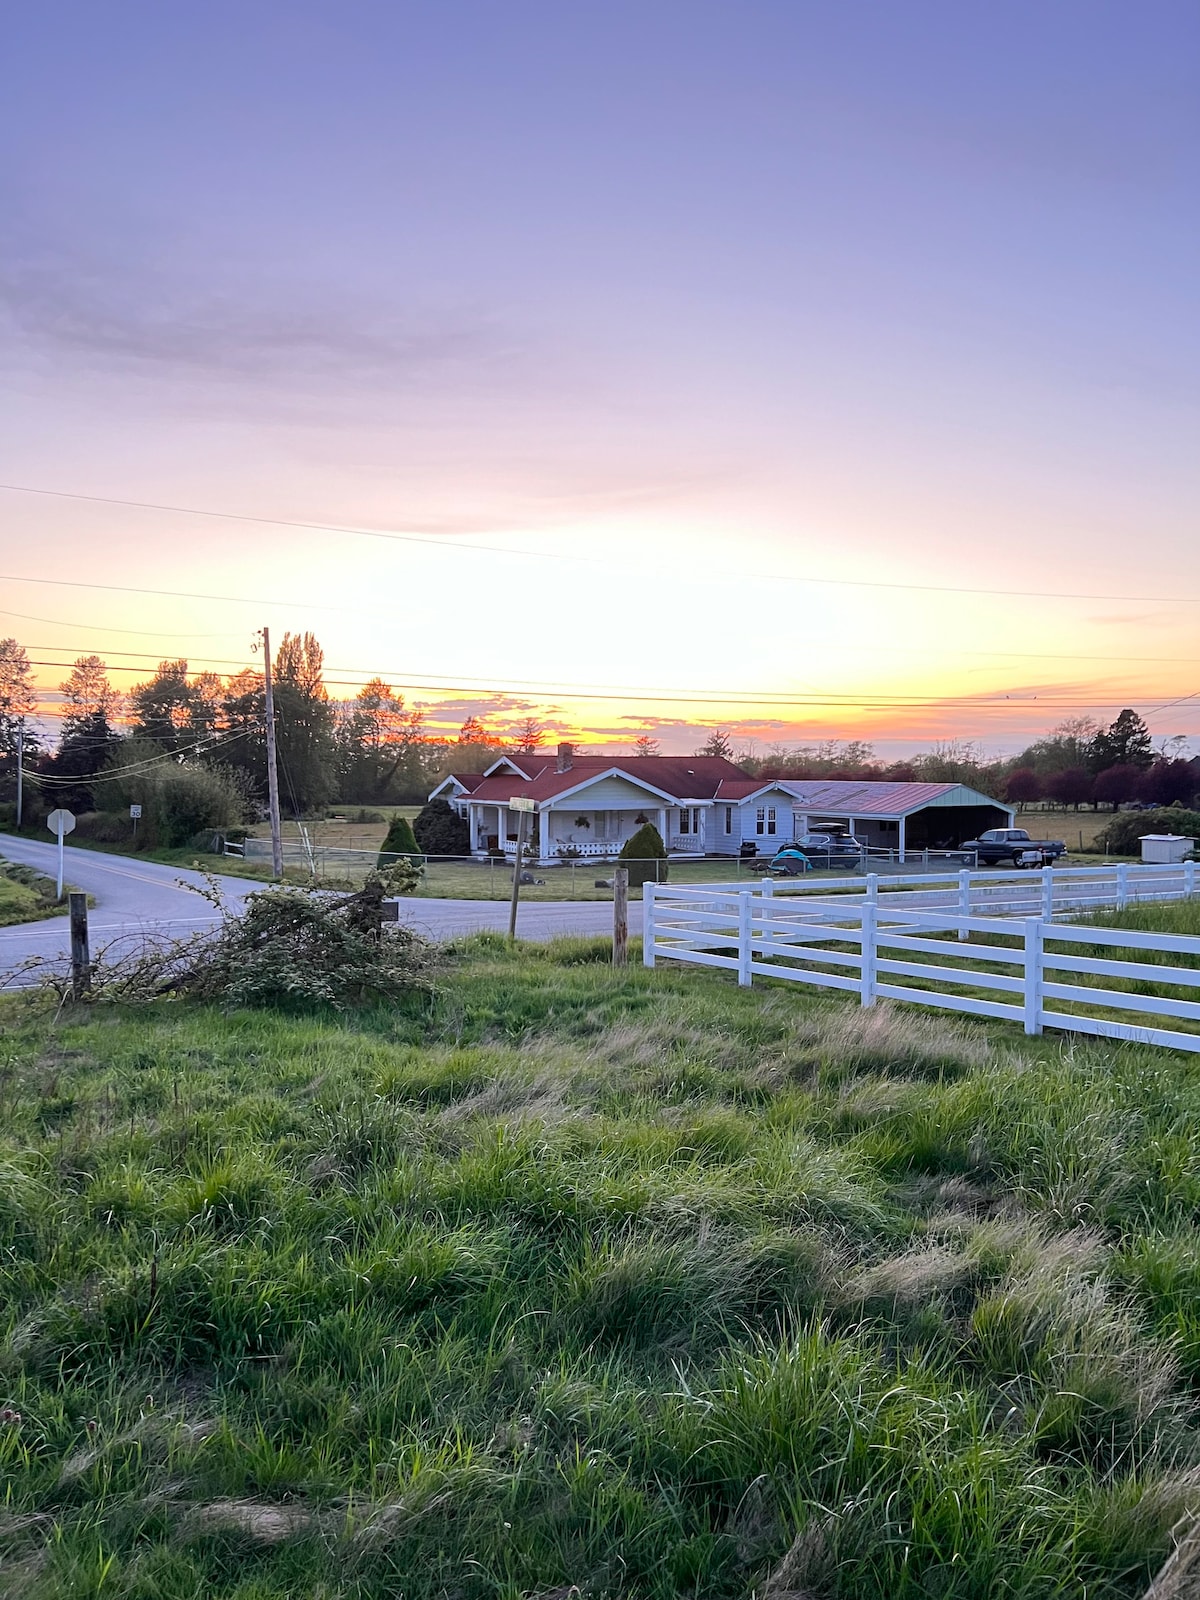 Bucolic Whidbey Island farmhouse by Deception Pass